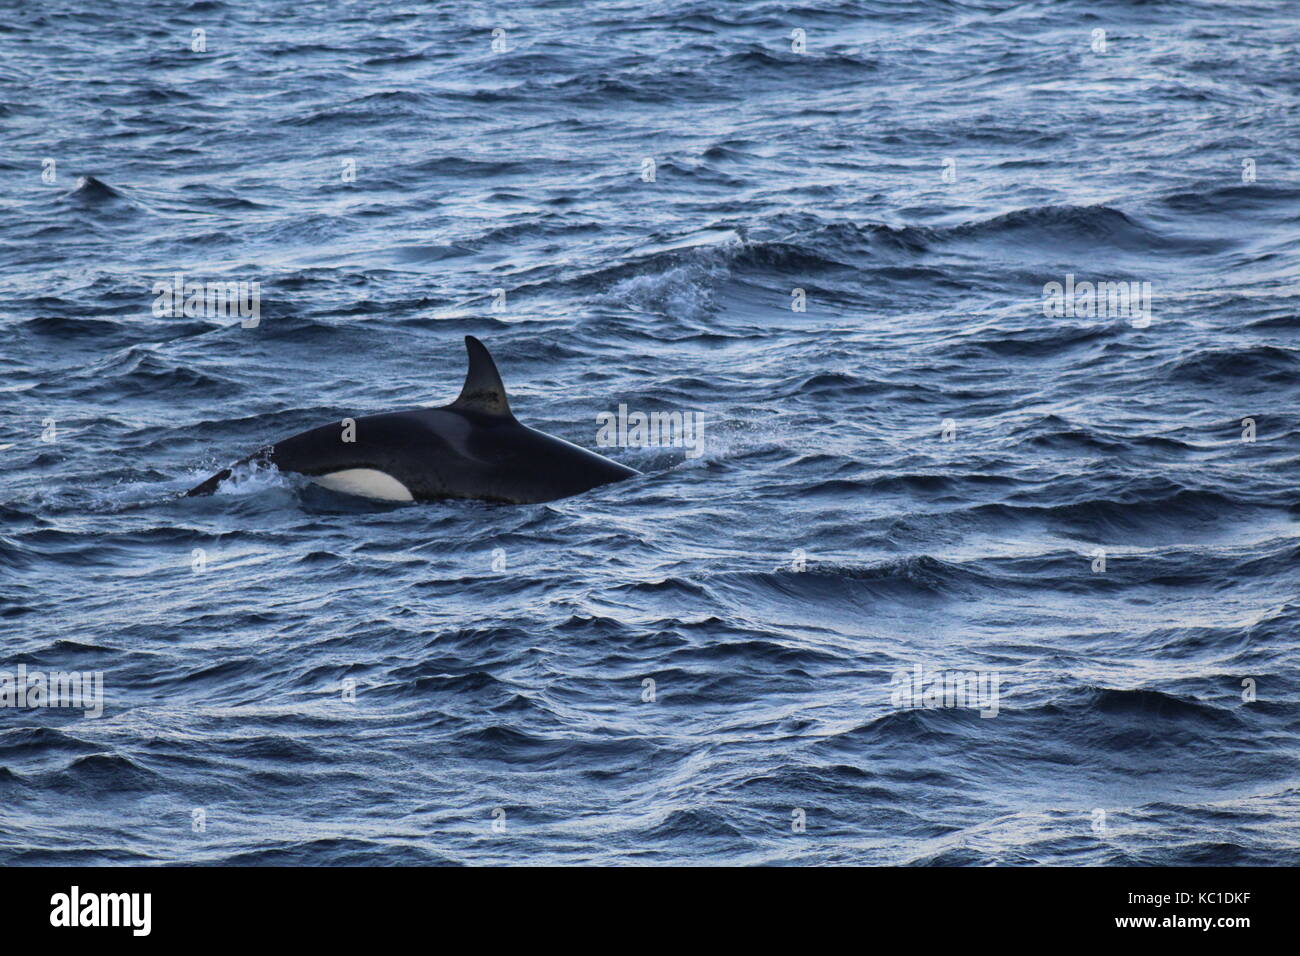 Orca whales surfacing in fjord by Tromso Norway Stock Photo